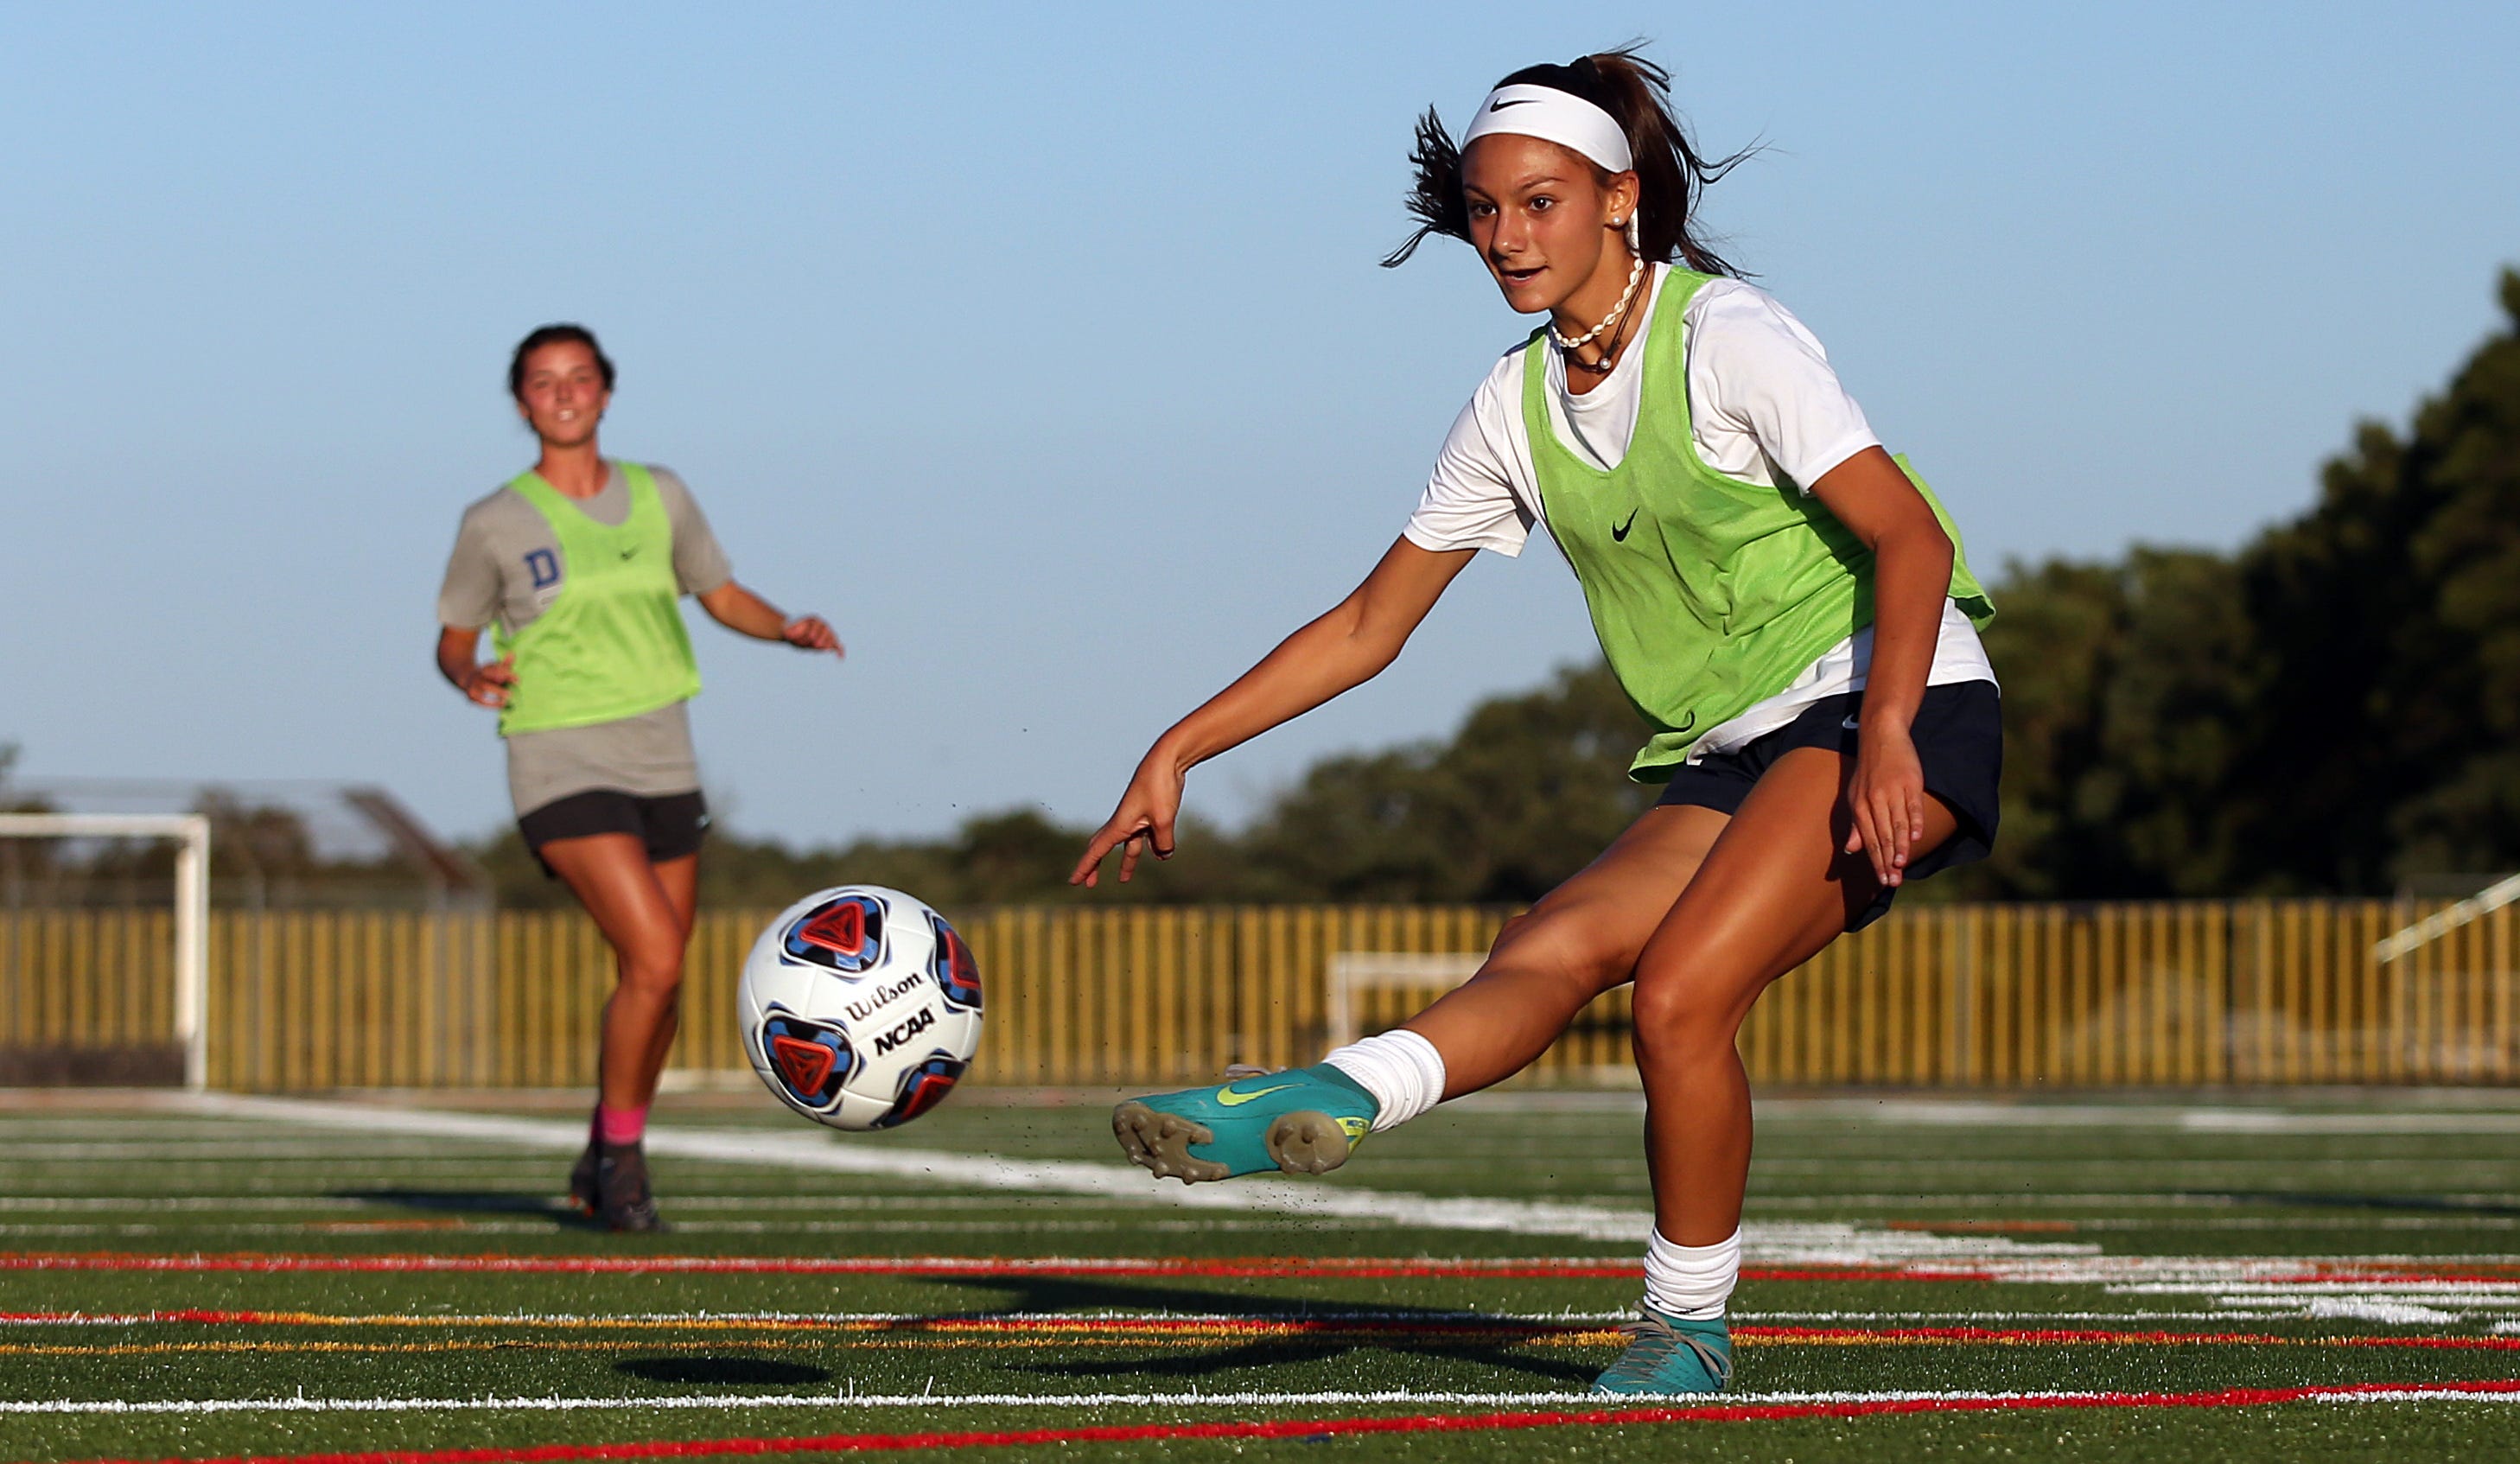 These Are The Best High School Girls Soccer Players At The Shore Ranked By Fans